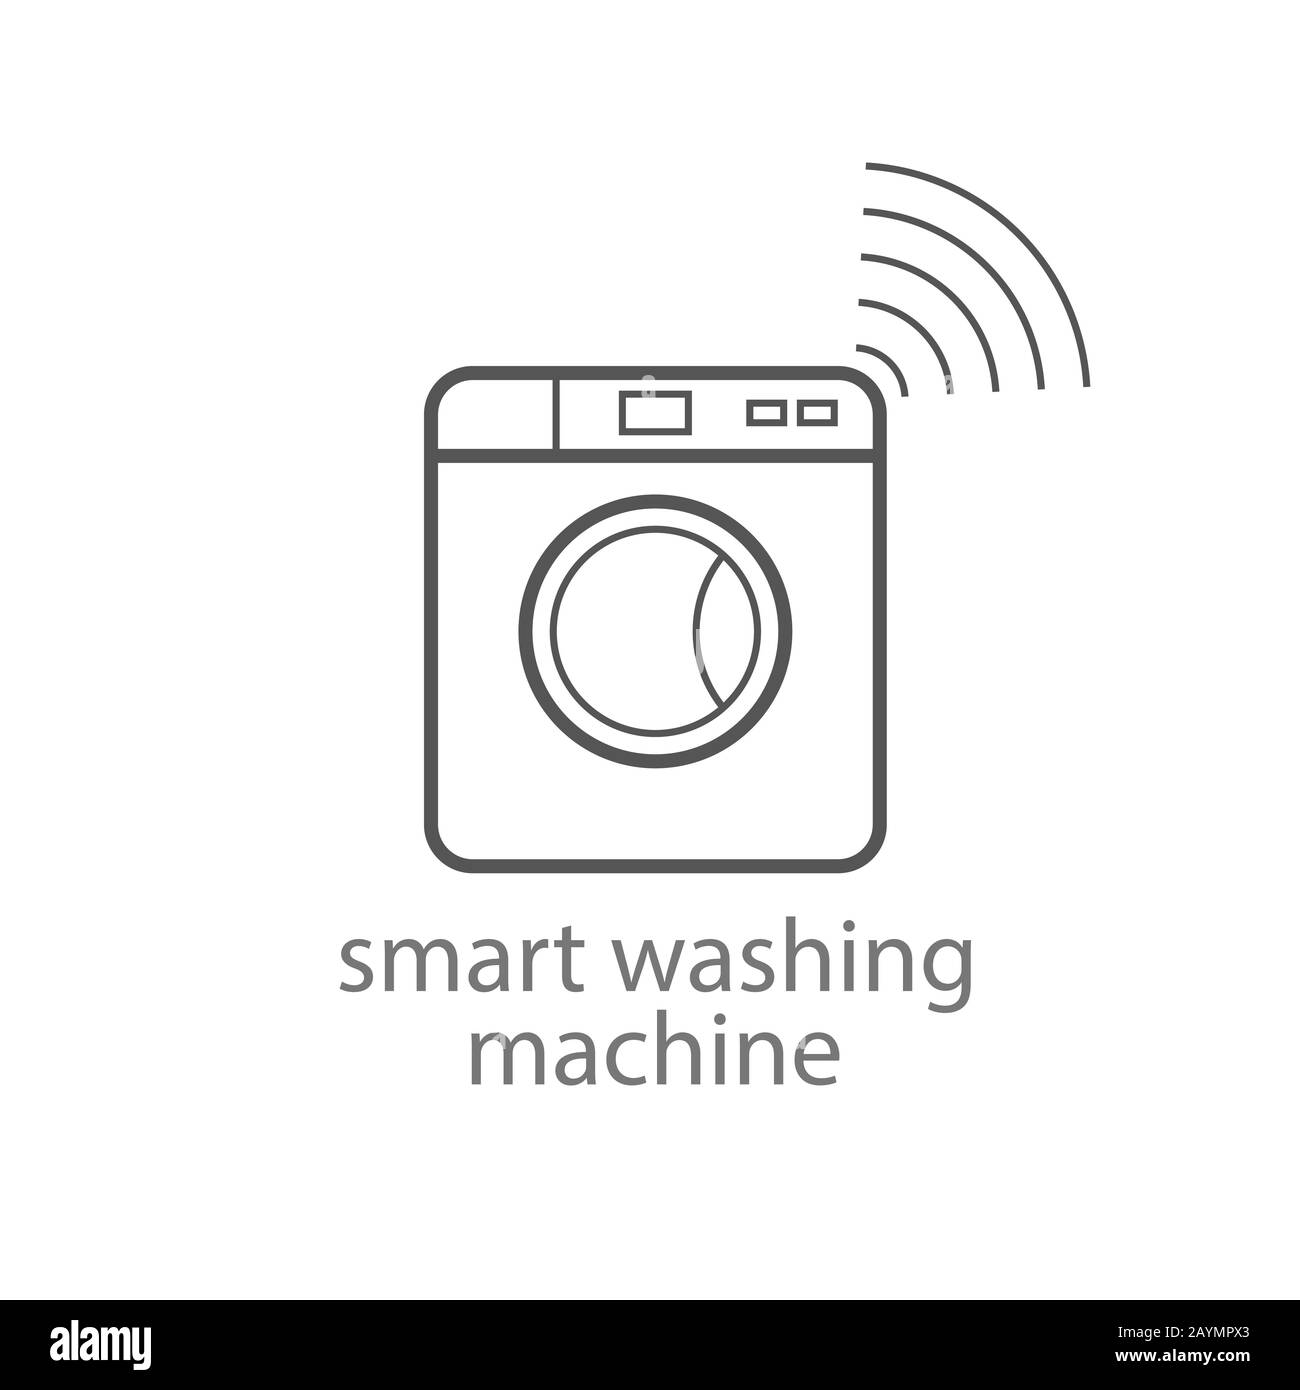 Smart washing machine icon. Smart kitchen appliances. Internet of things concept with wireless connection. Modern design. Vector illustration. EPS 10 Stock Vector